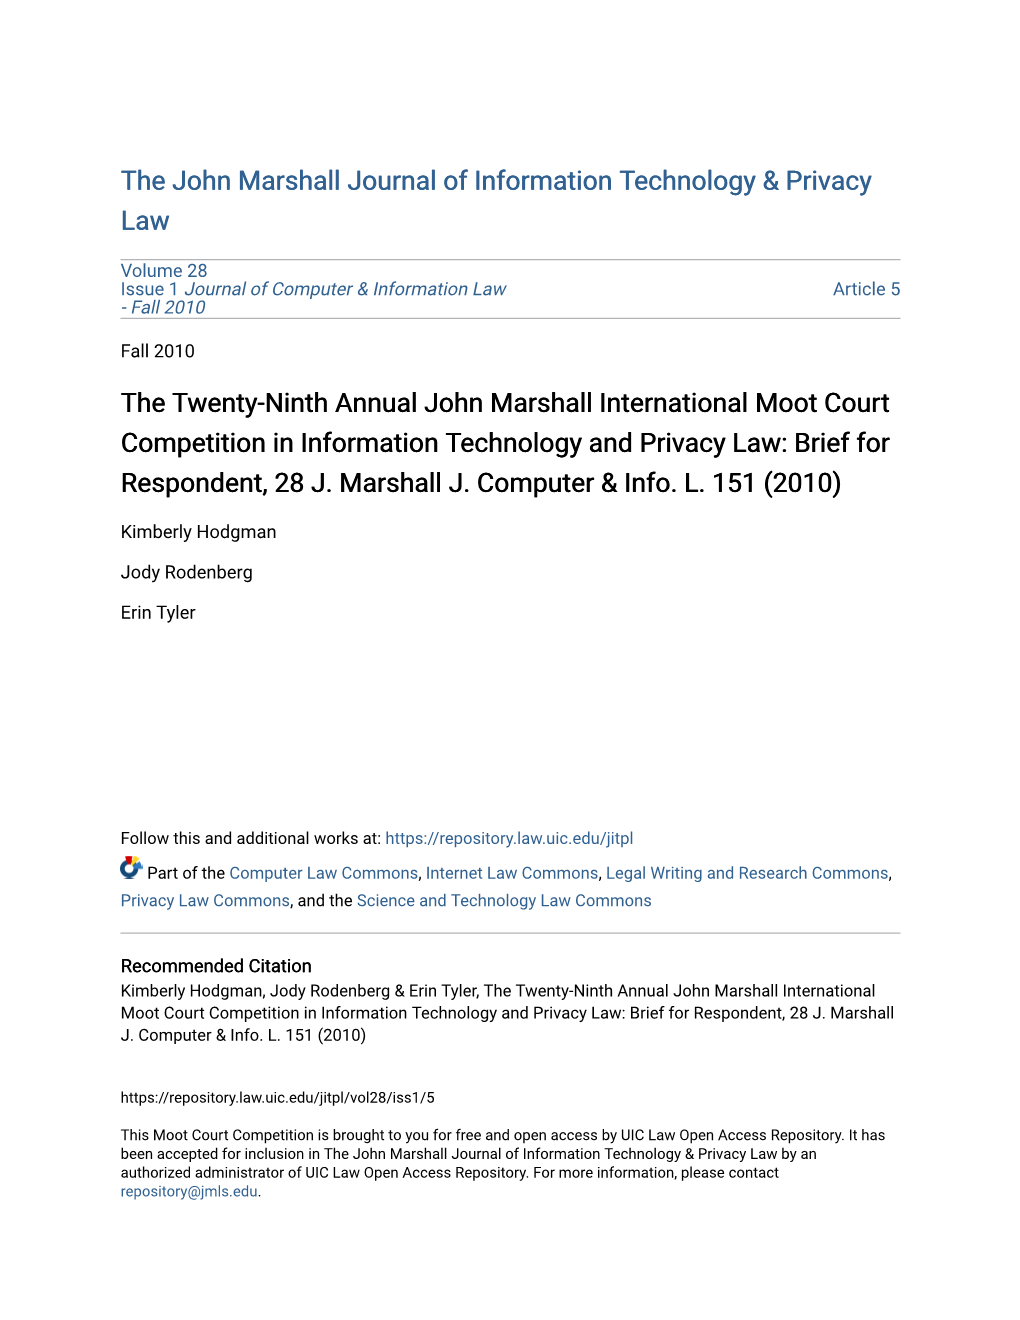 The Twenty-Ninth Annual John Marshall International Moot Court Competition in Information Technology and Privacy Law: Brief for Respondent, 28 J